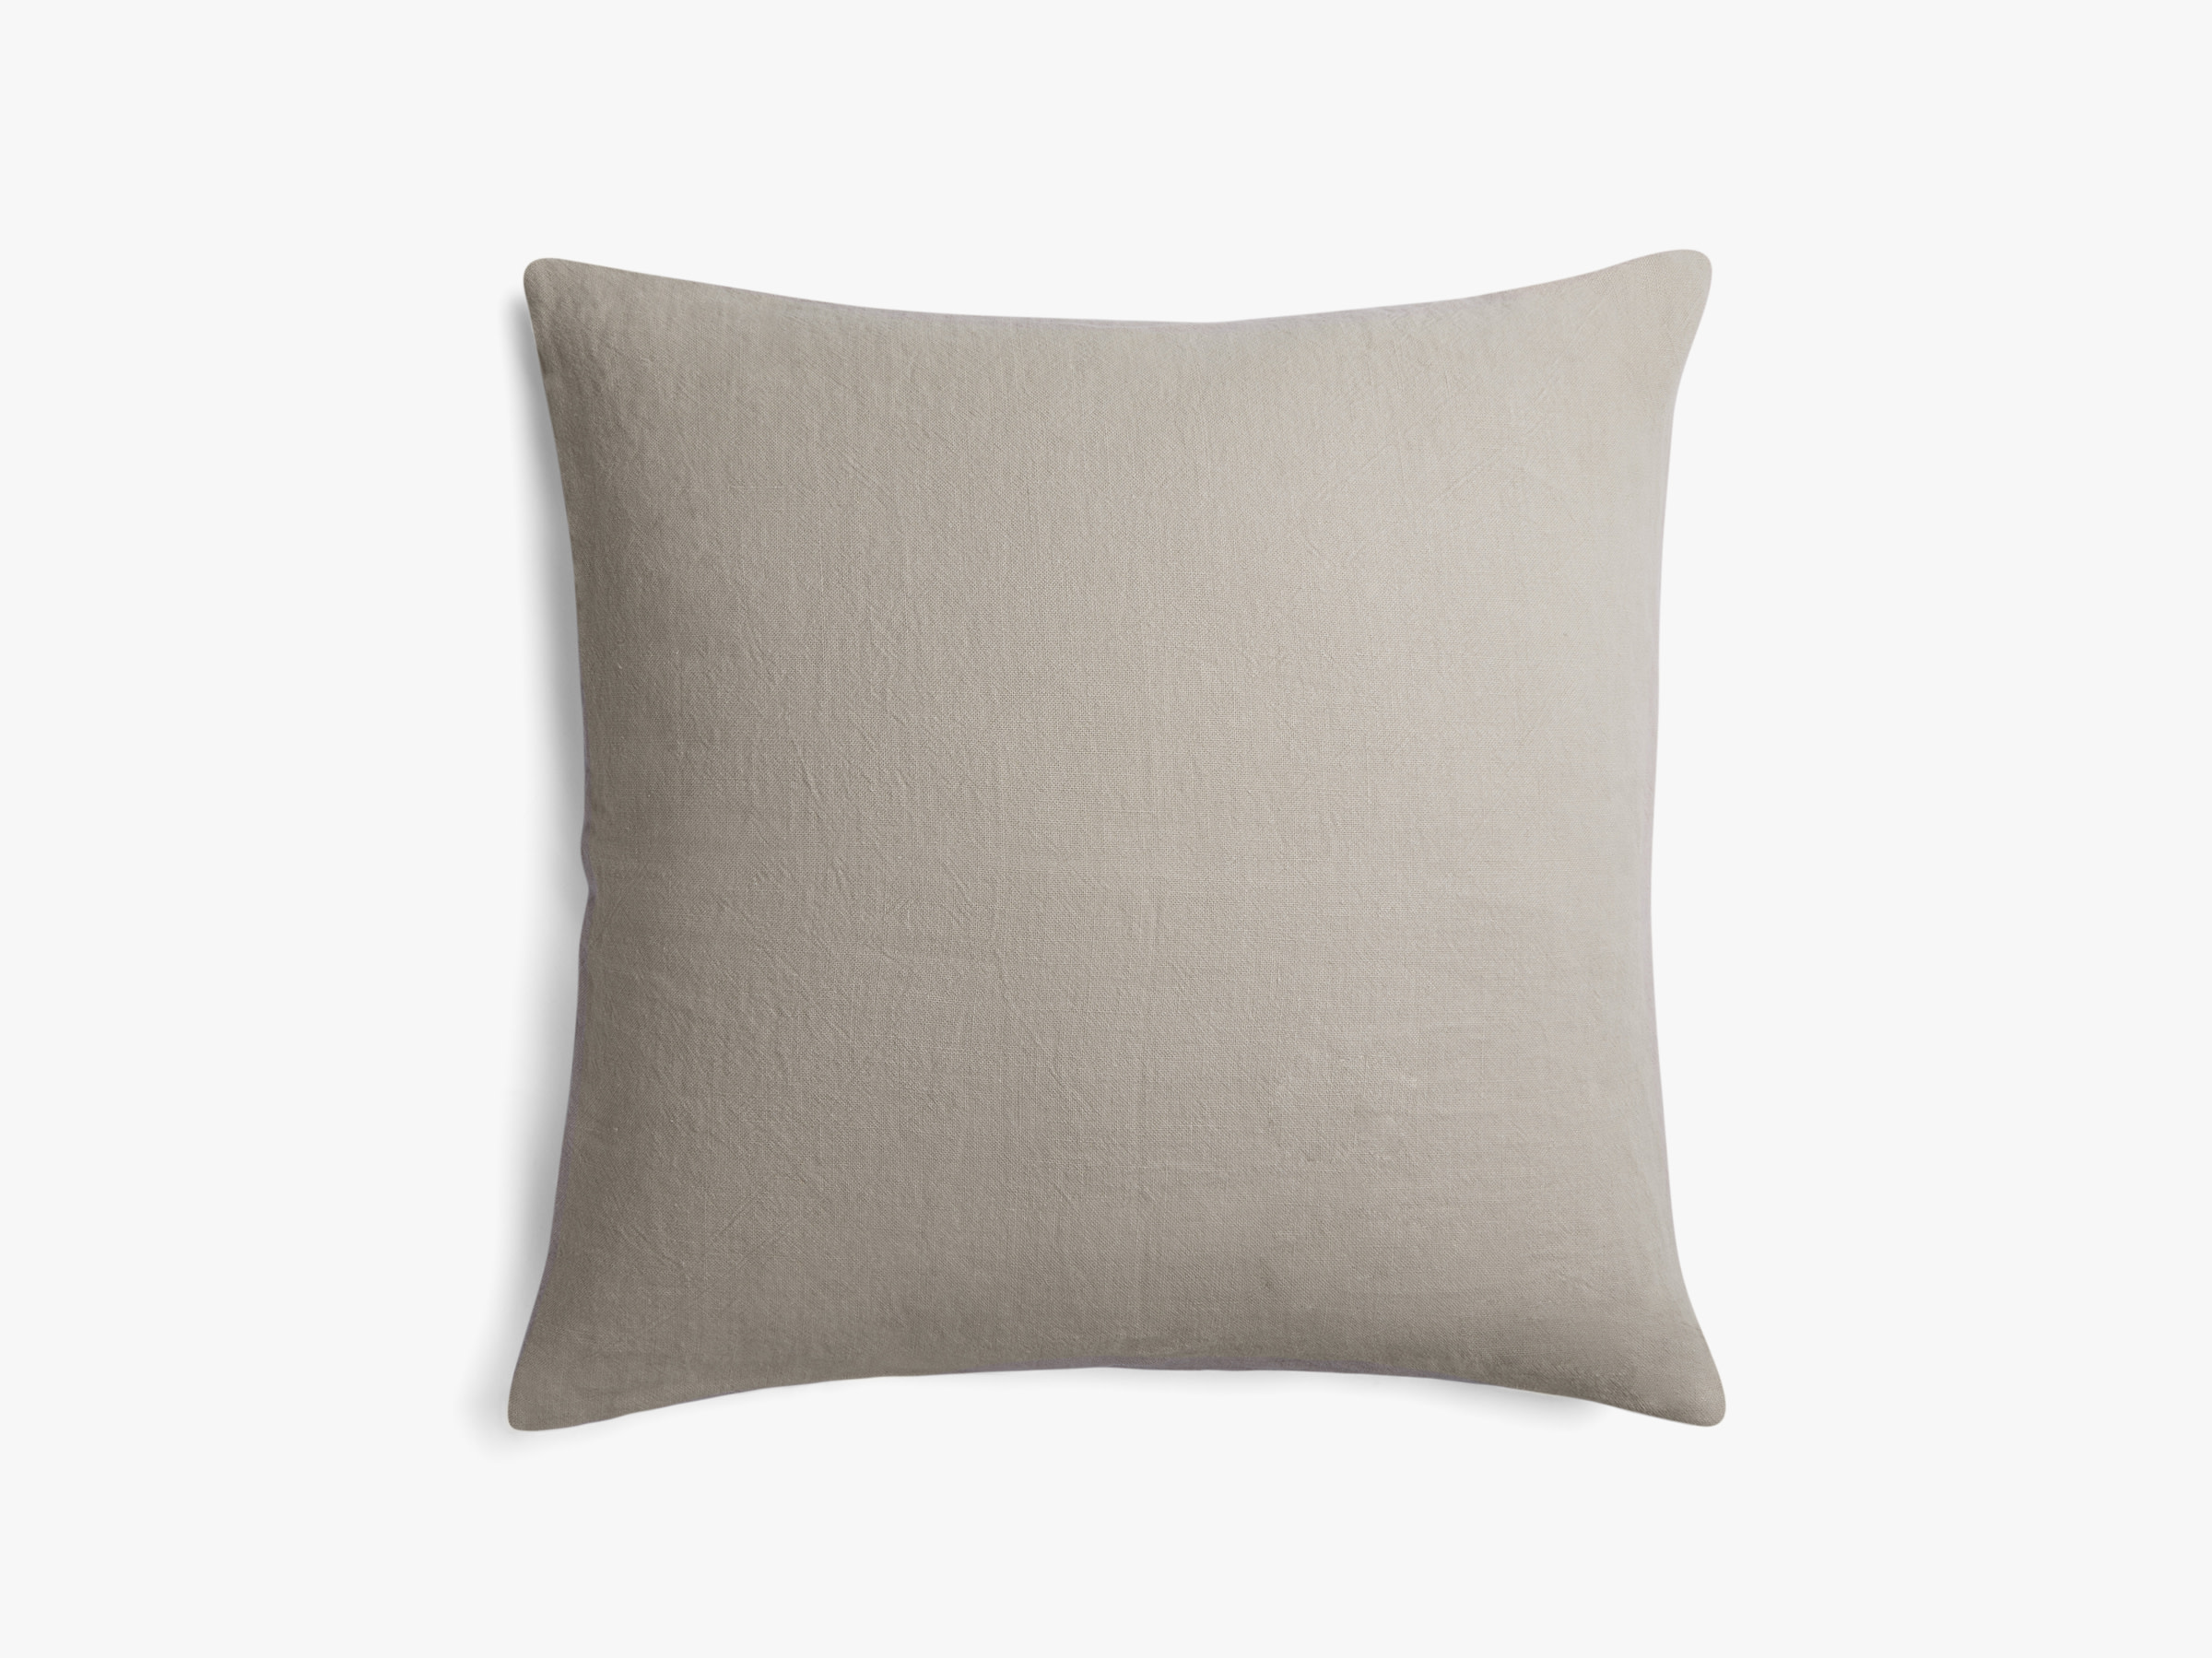 Natural Vintage Linen Euro Pillow Cover Product Image